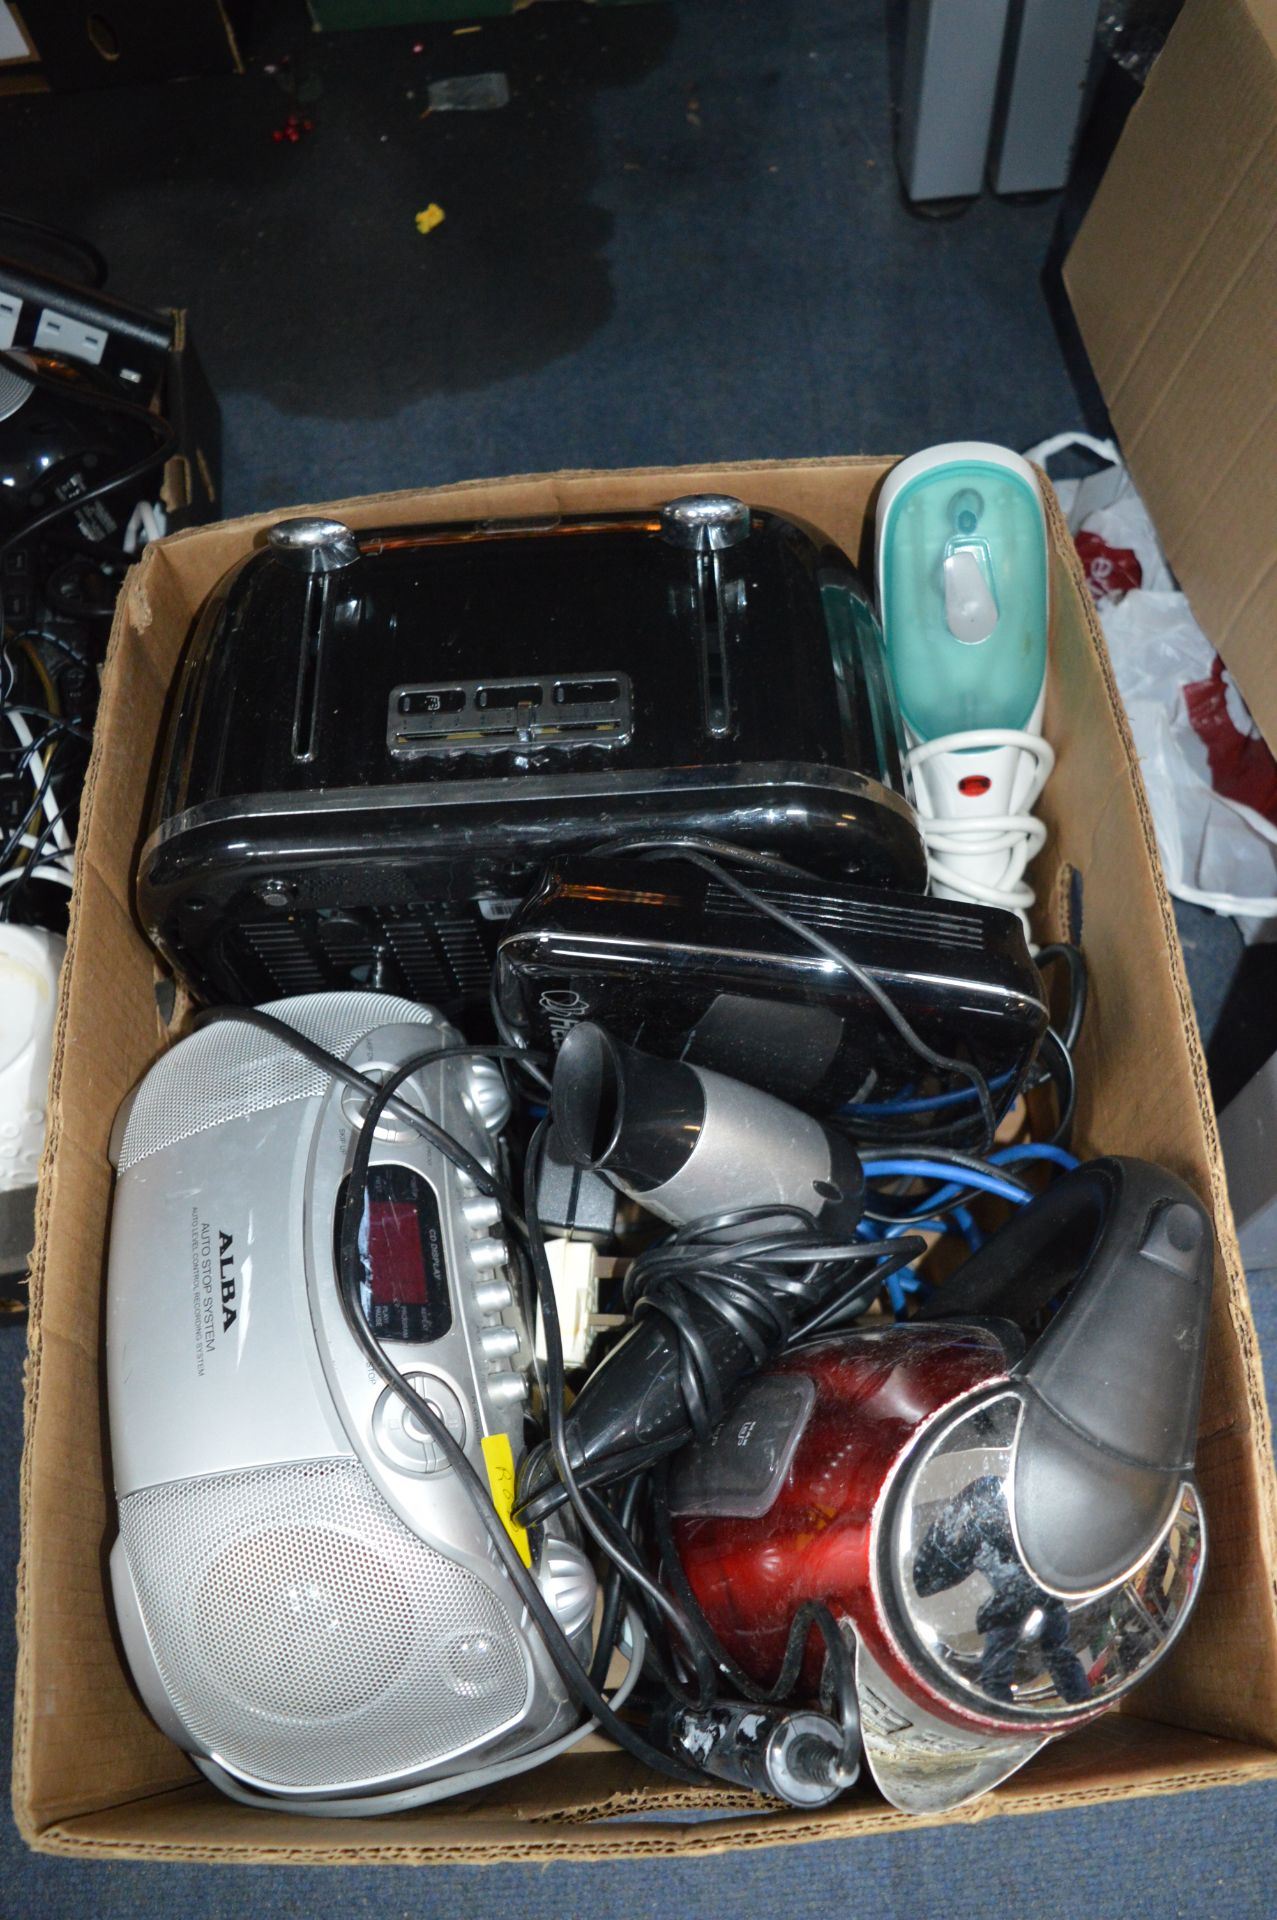 Electrical Items; Toasters, Kettles, etc.